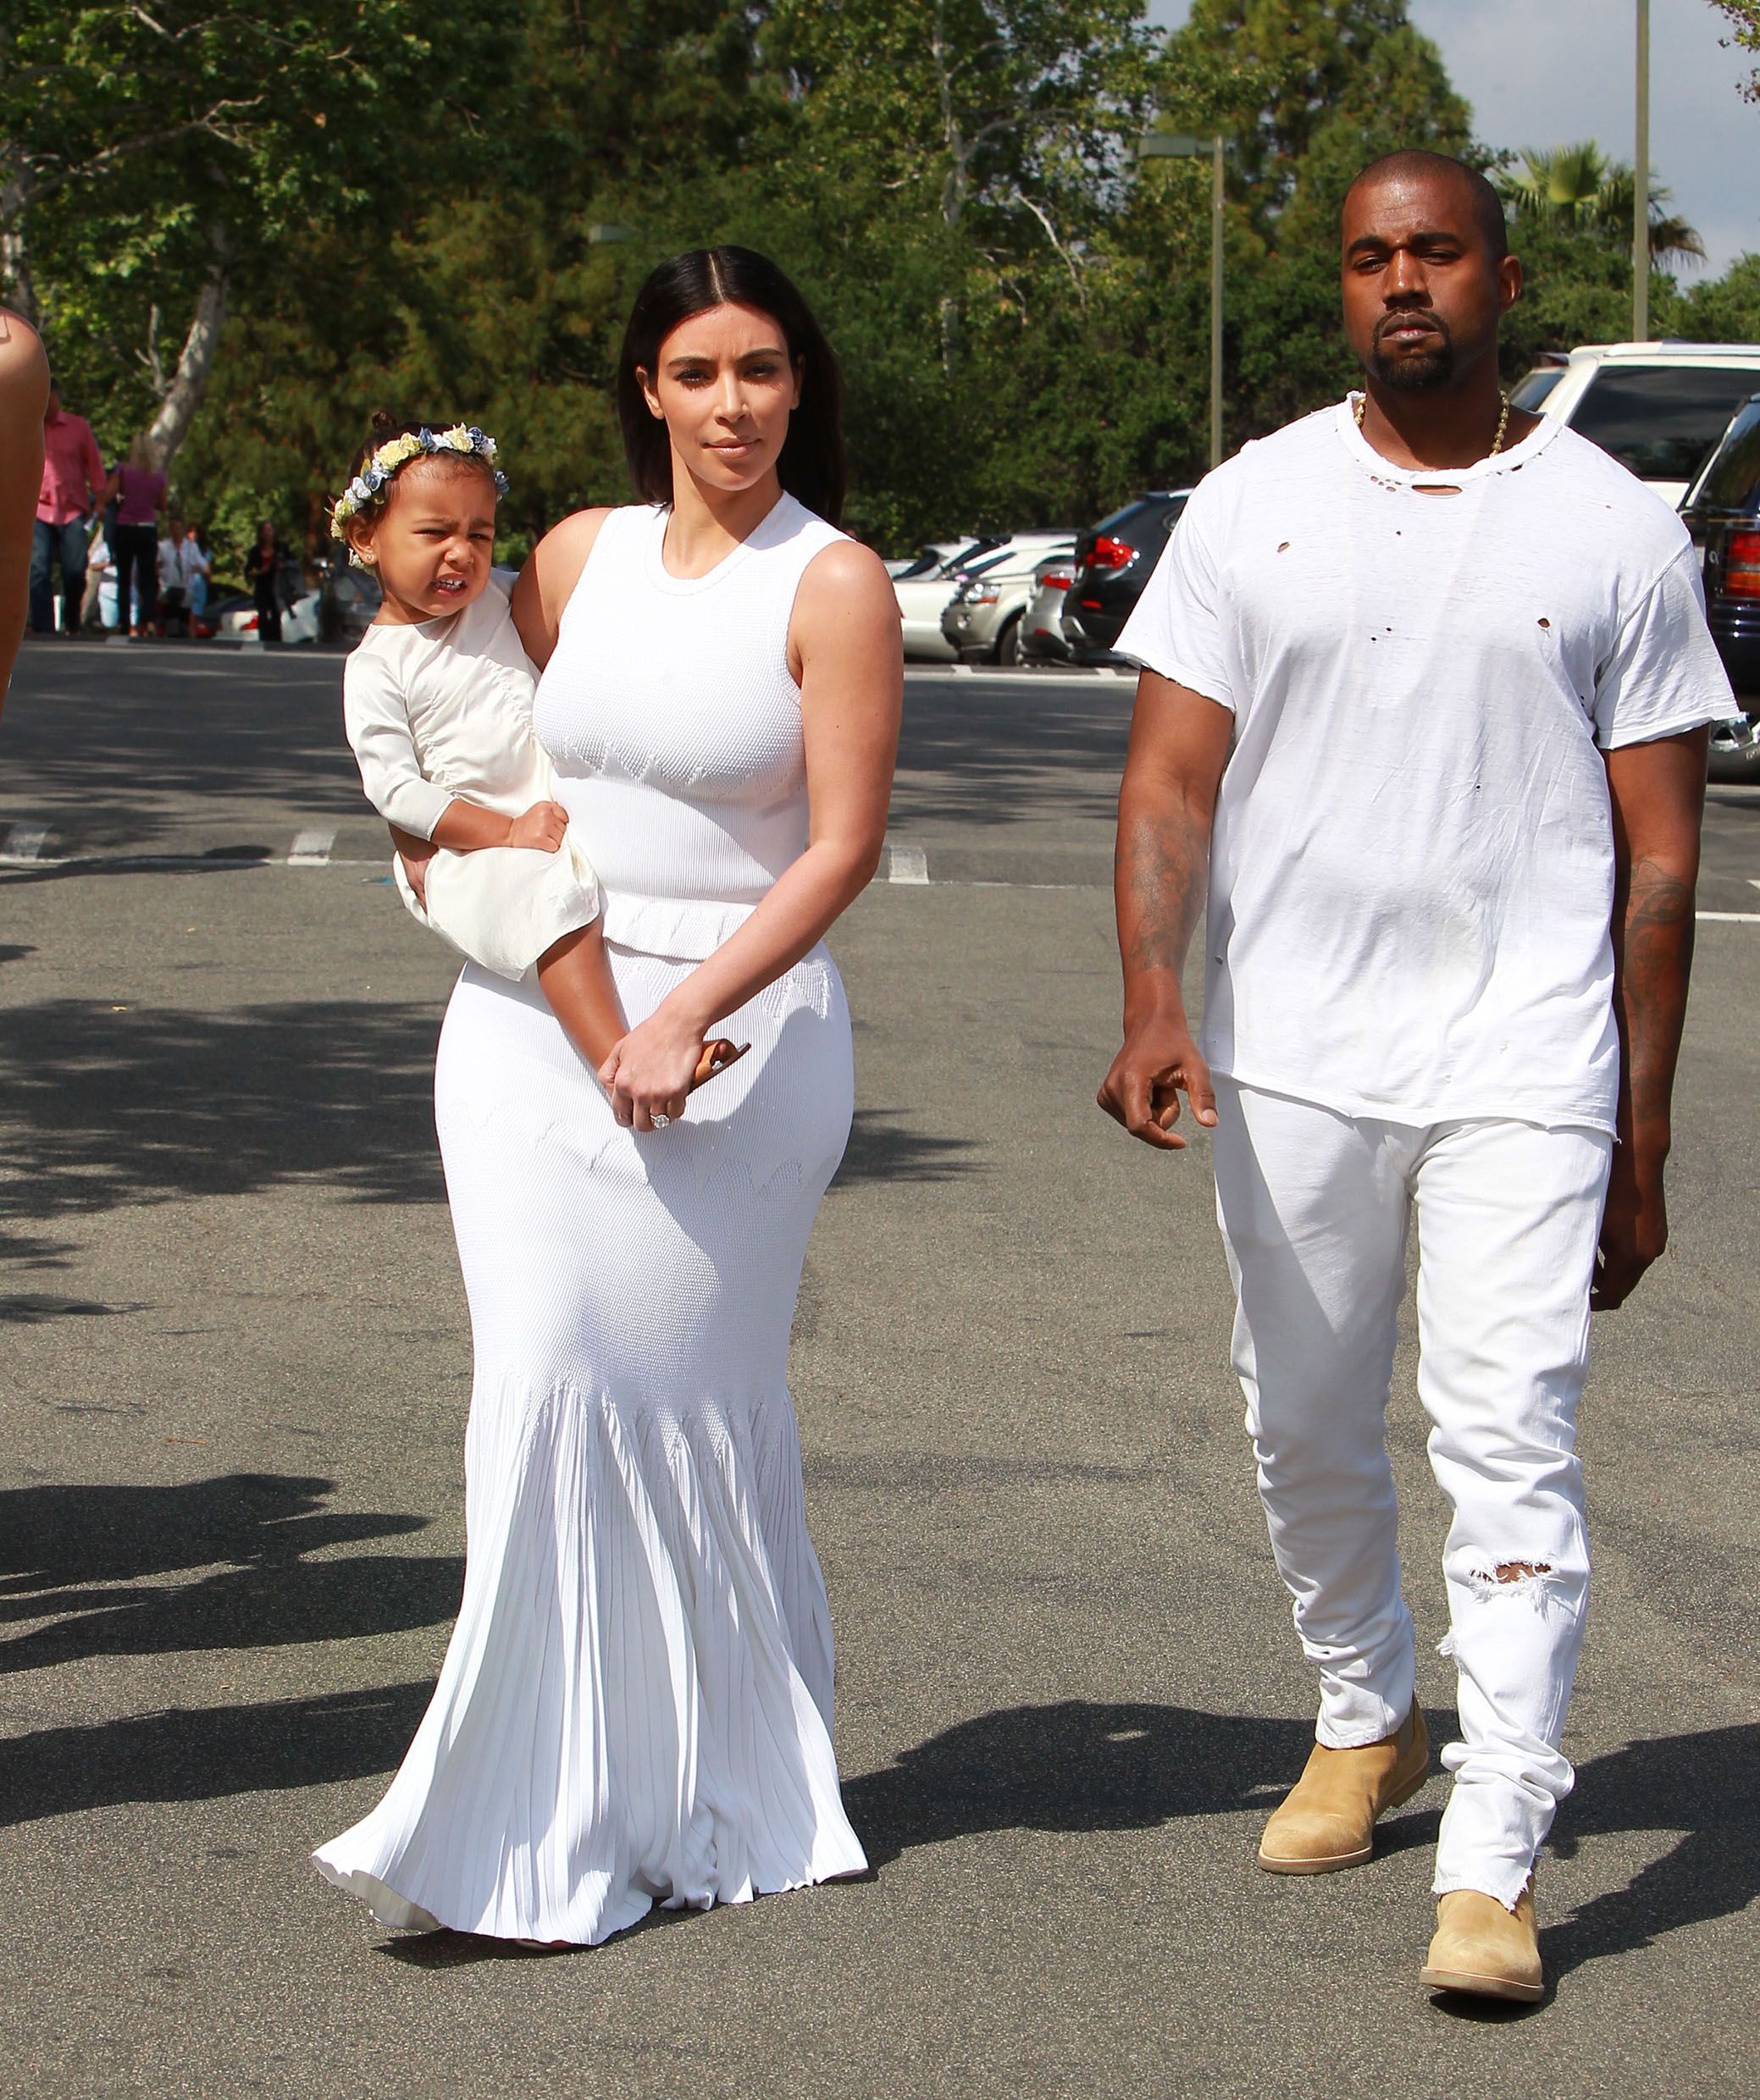 The Best Celebrity Wedding Guest Outfits of 2018  Kim kardashian style  outfits, Kim kardashian kanye west, Kim and kanye